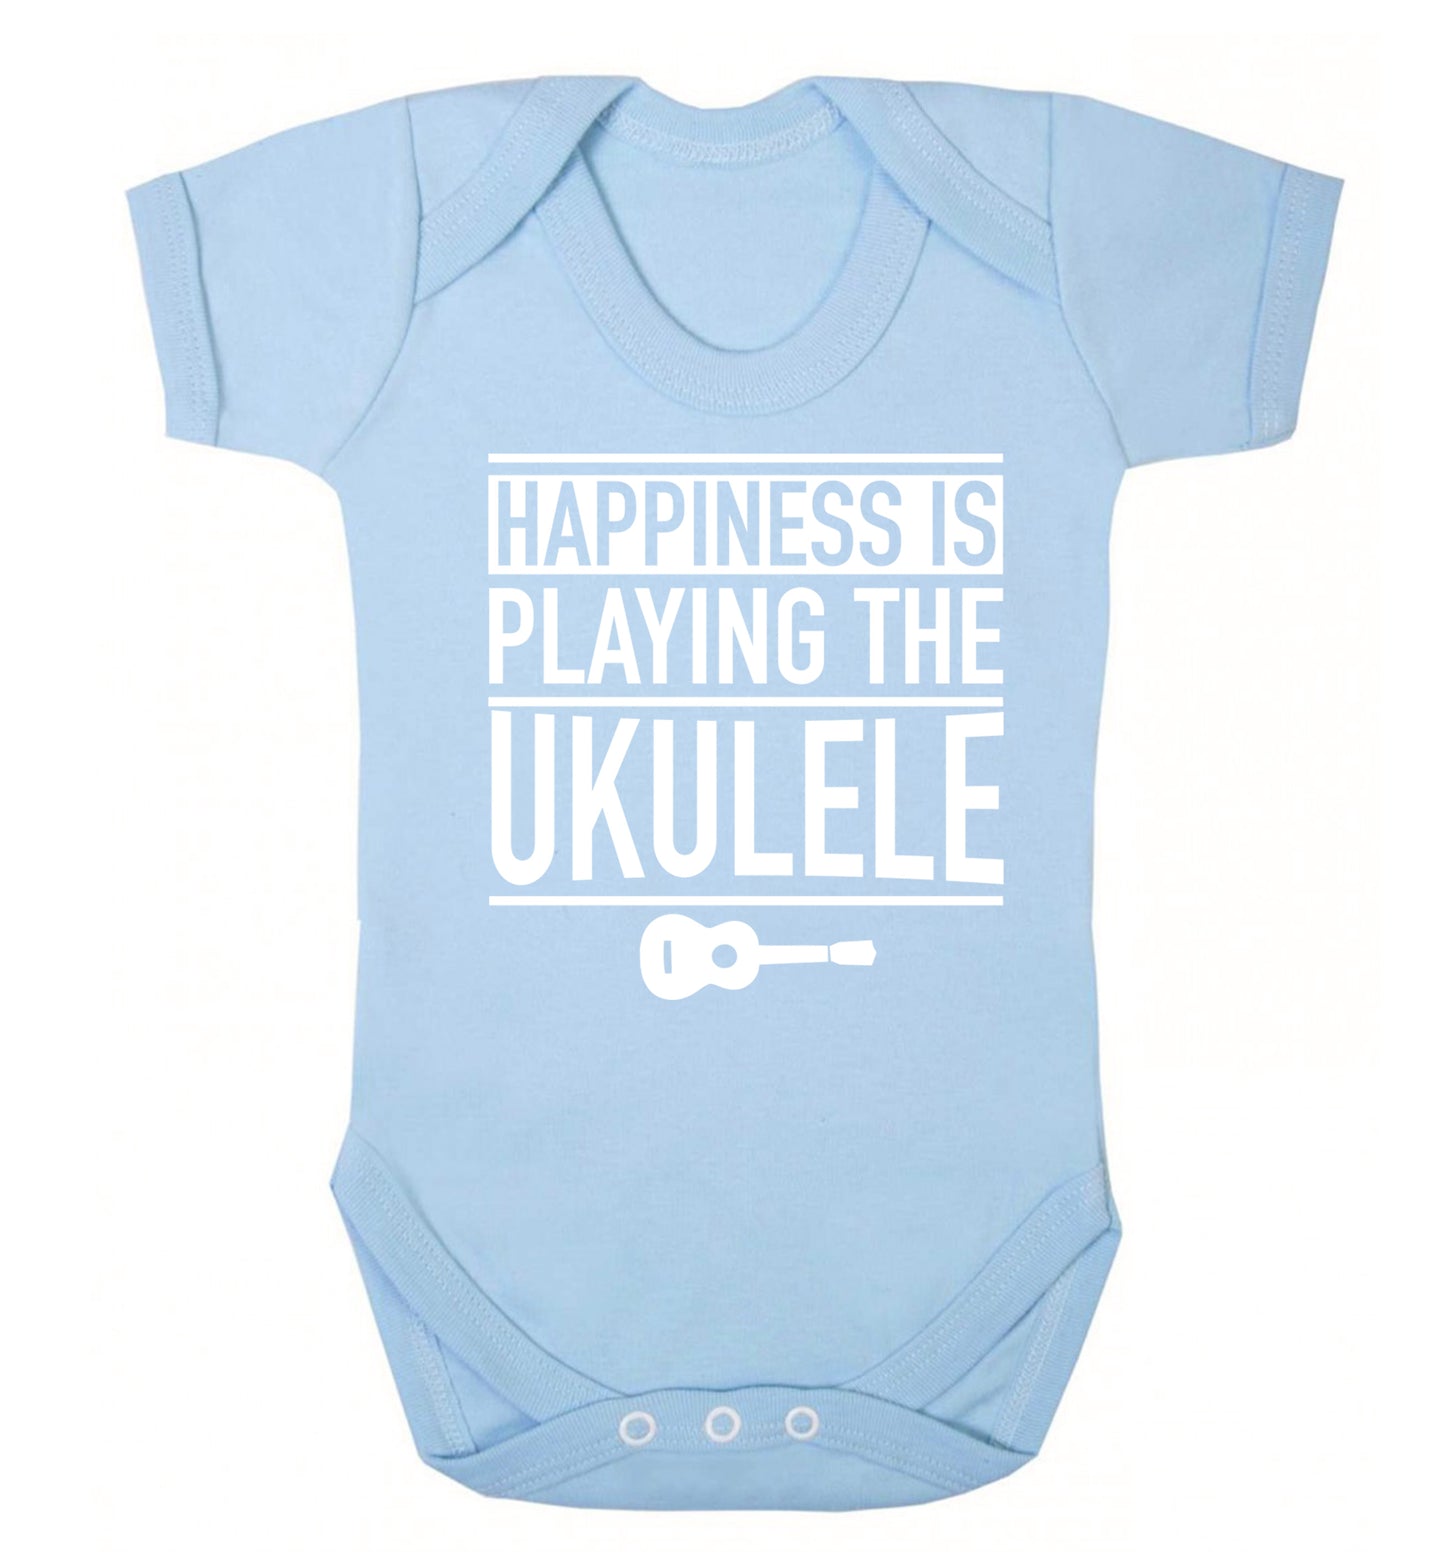 Happines is playing the ukulele Baby Vest pale blue 18-24 months